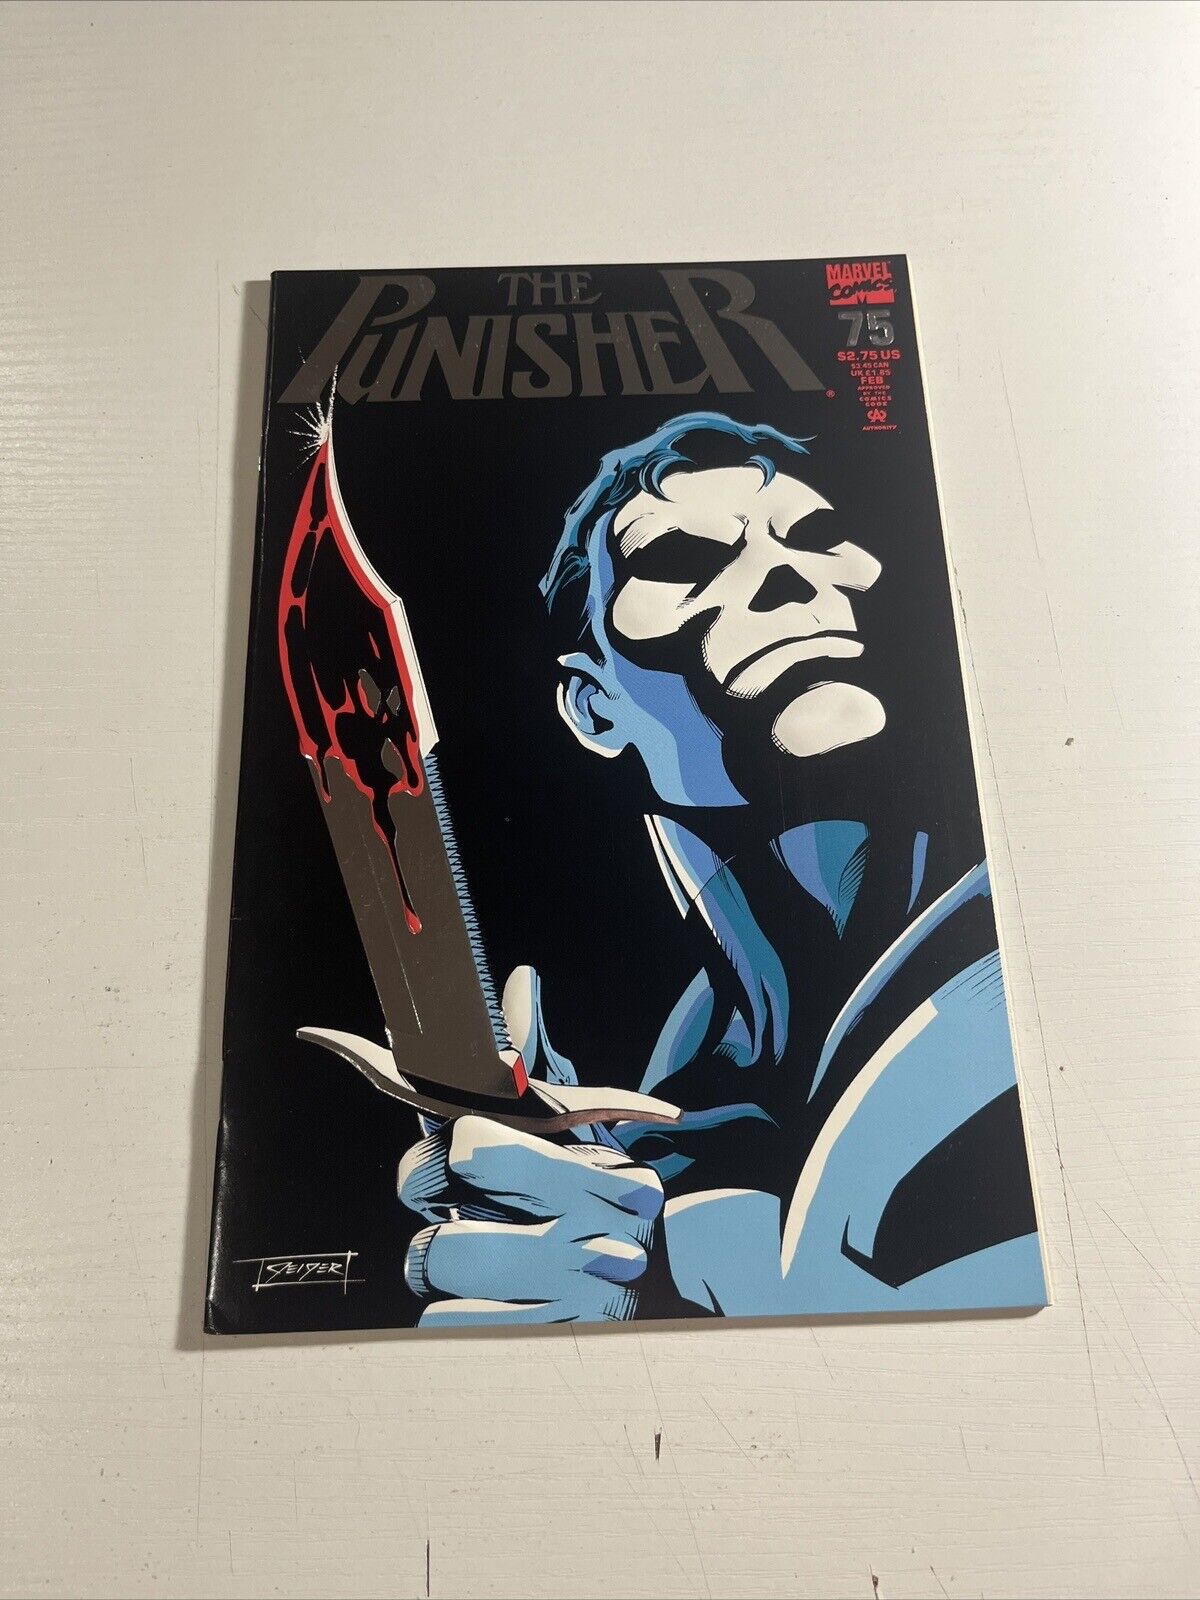 The Punisher #75 Embossed Silver Foil Cover -Marvel Comics-1993 MINT / NEAR MINT